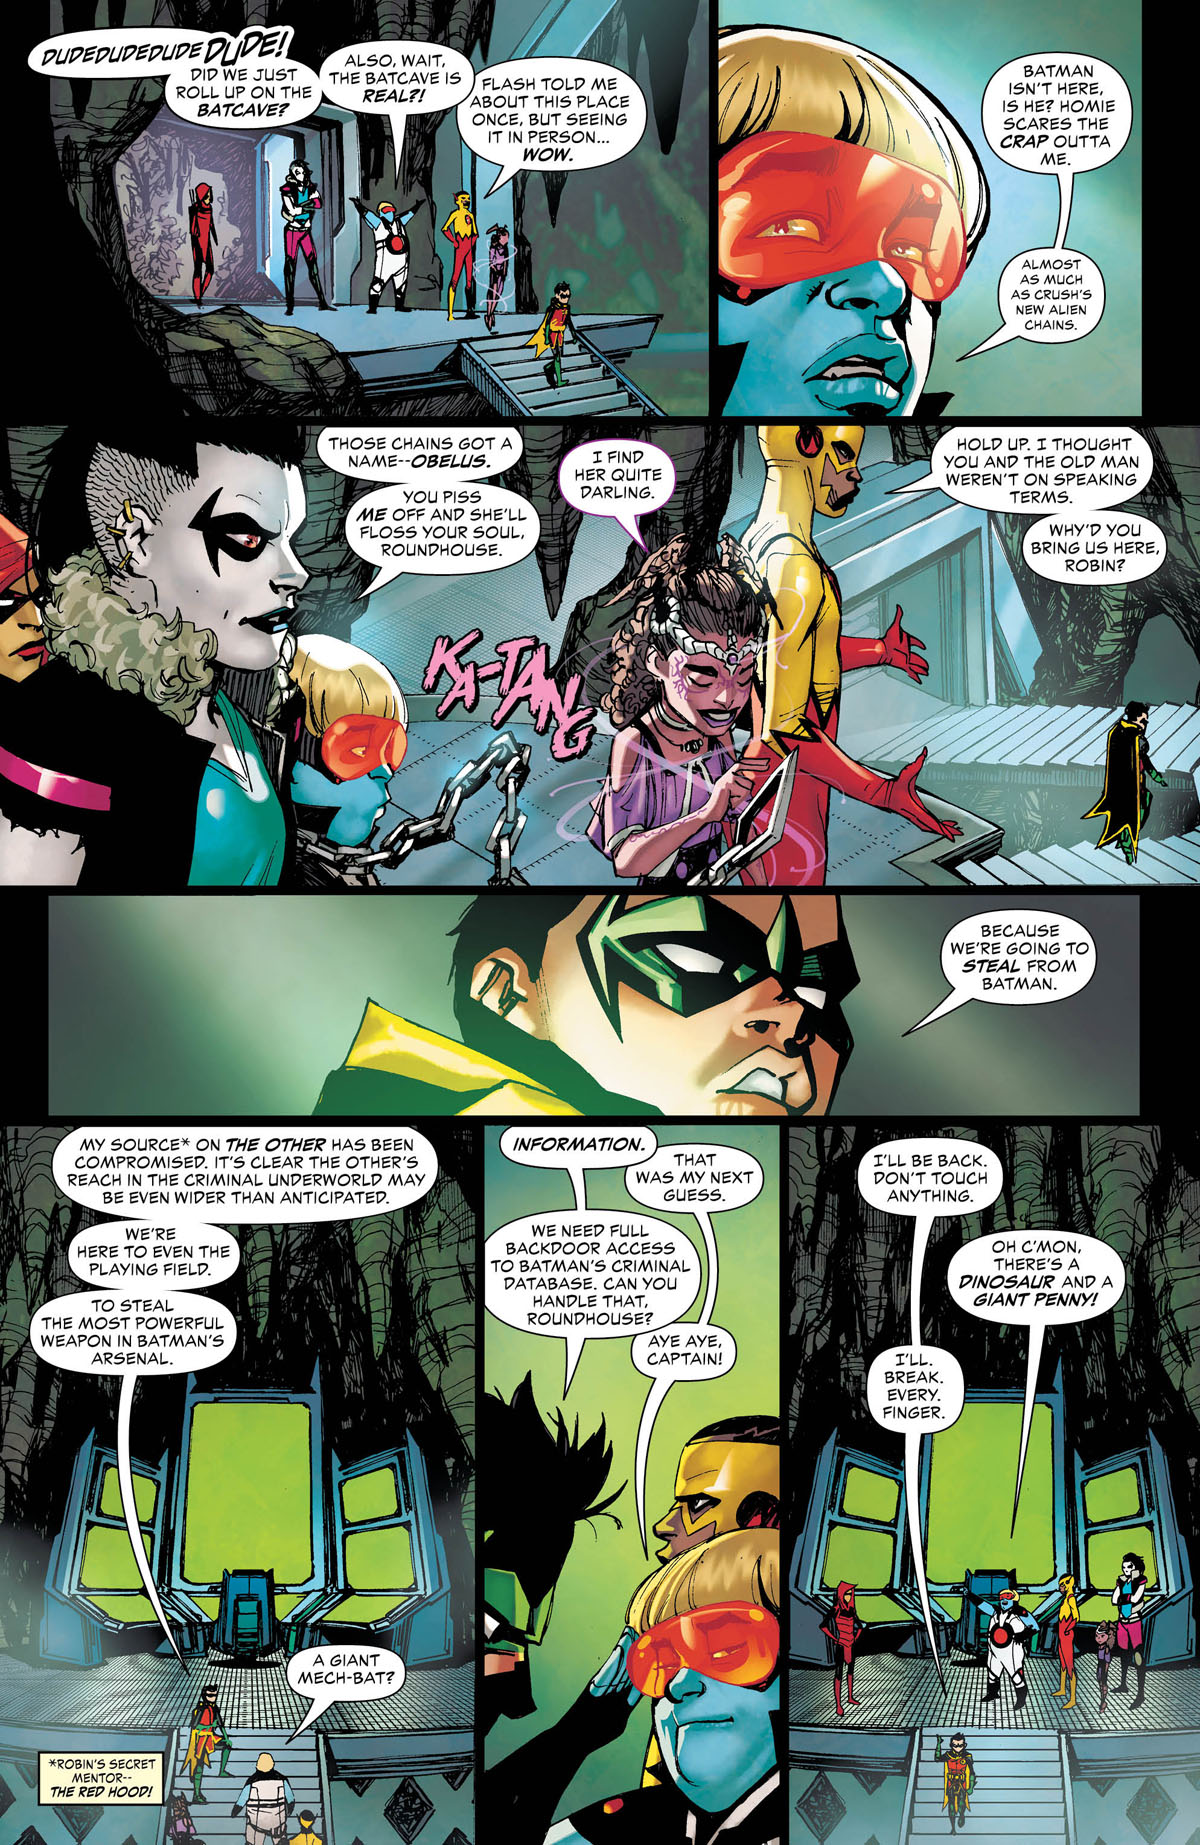 Teen Titans #26 page 4